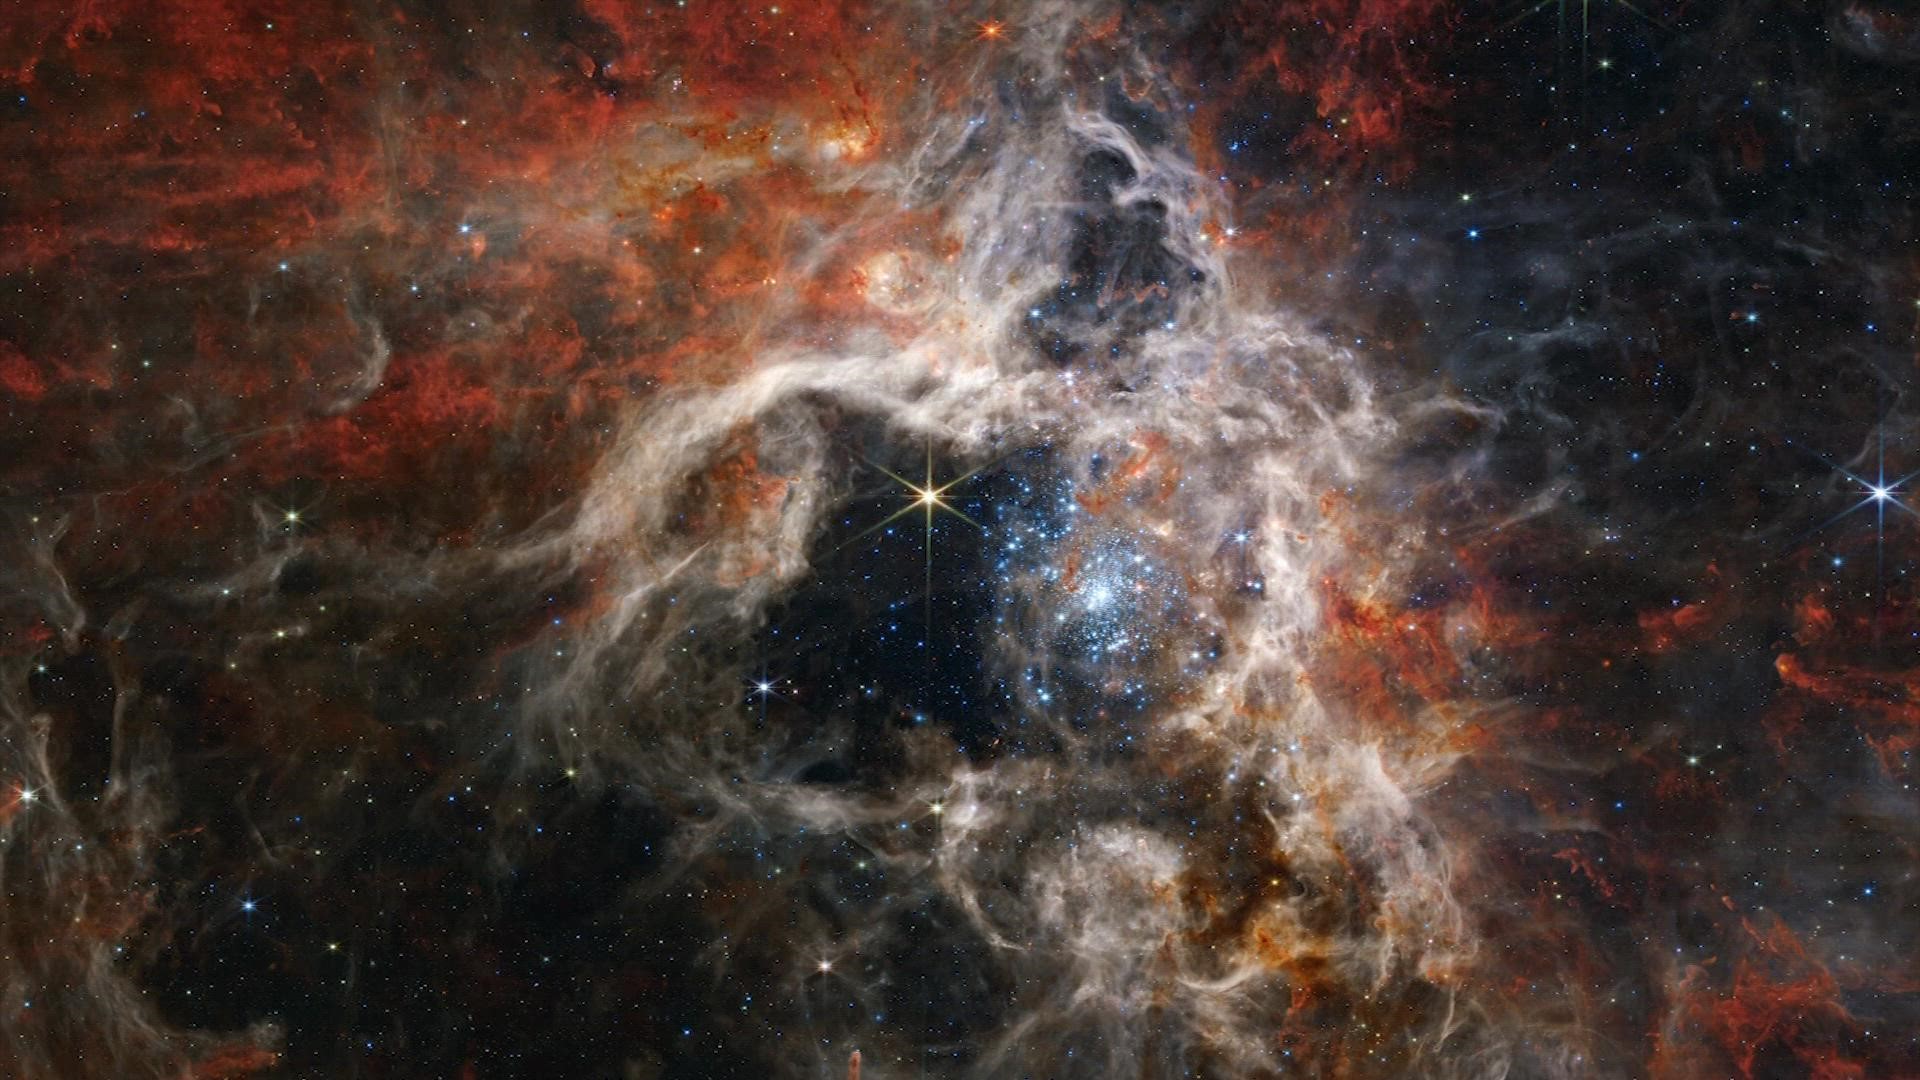 NASA says the Tarantula Nebula is known as the 30 Doradus but is nicknamed since the region “resembles a burrowing tarantula’s home, lined with its silk."